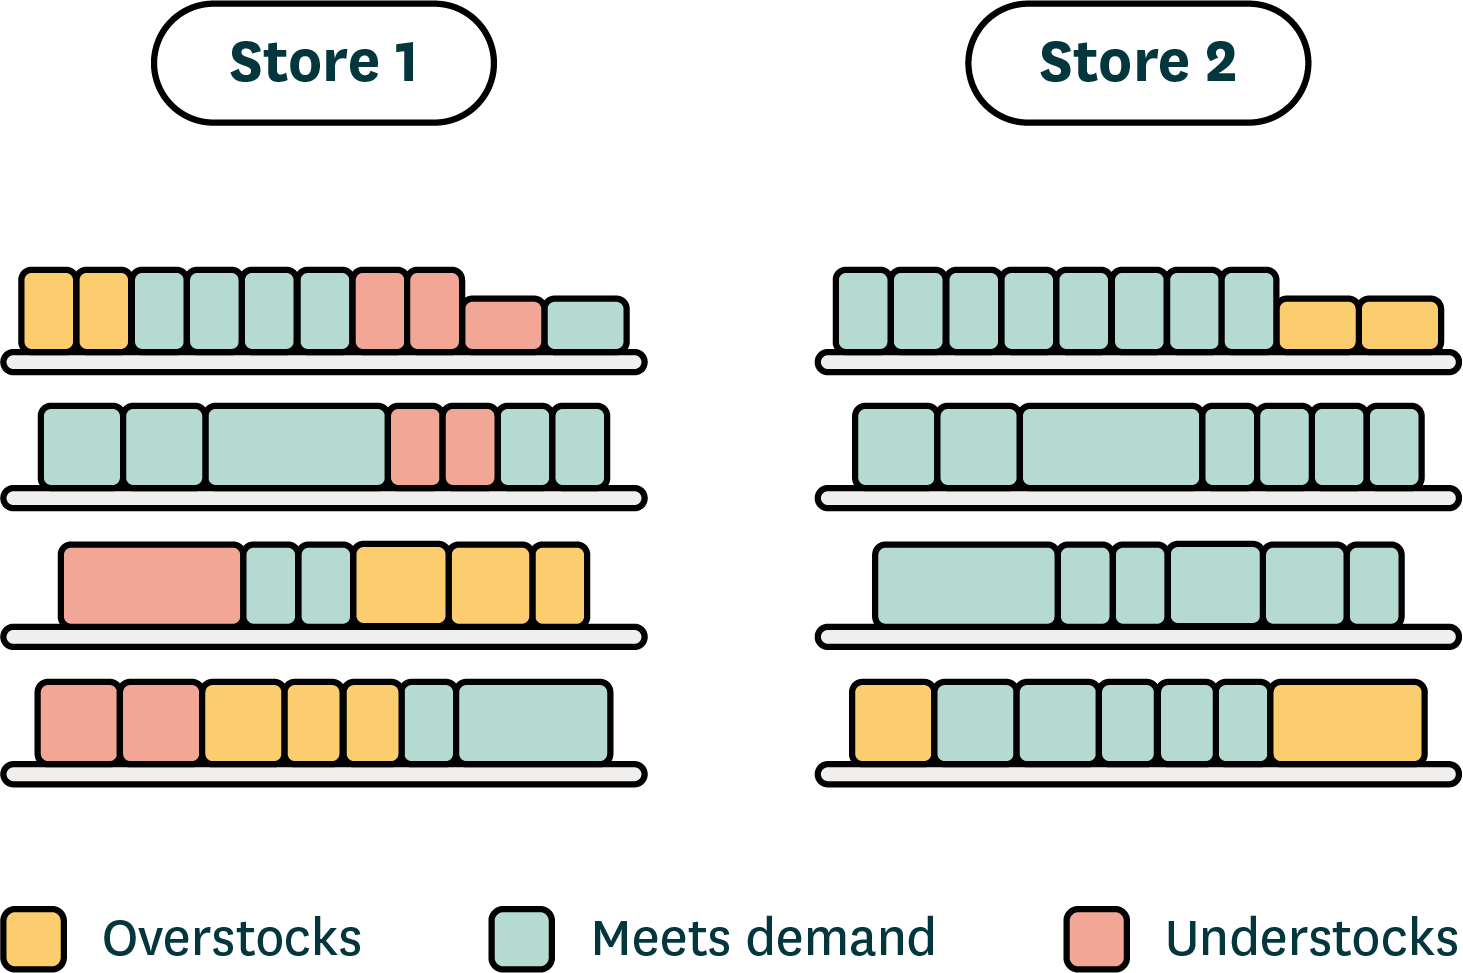 A comparison of shelves and inventory levels between two stores. The first store experiences over- and under-stocking. The second store, which follows the national average across the chain, experiences far fewer issues yet still experiences instances of overstocking.